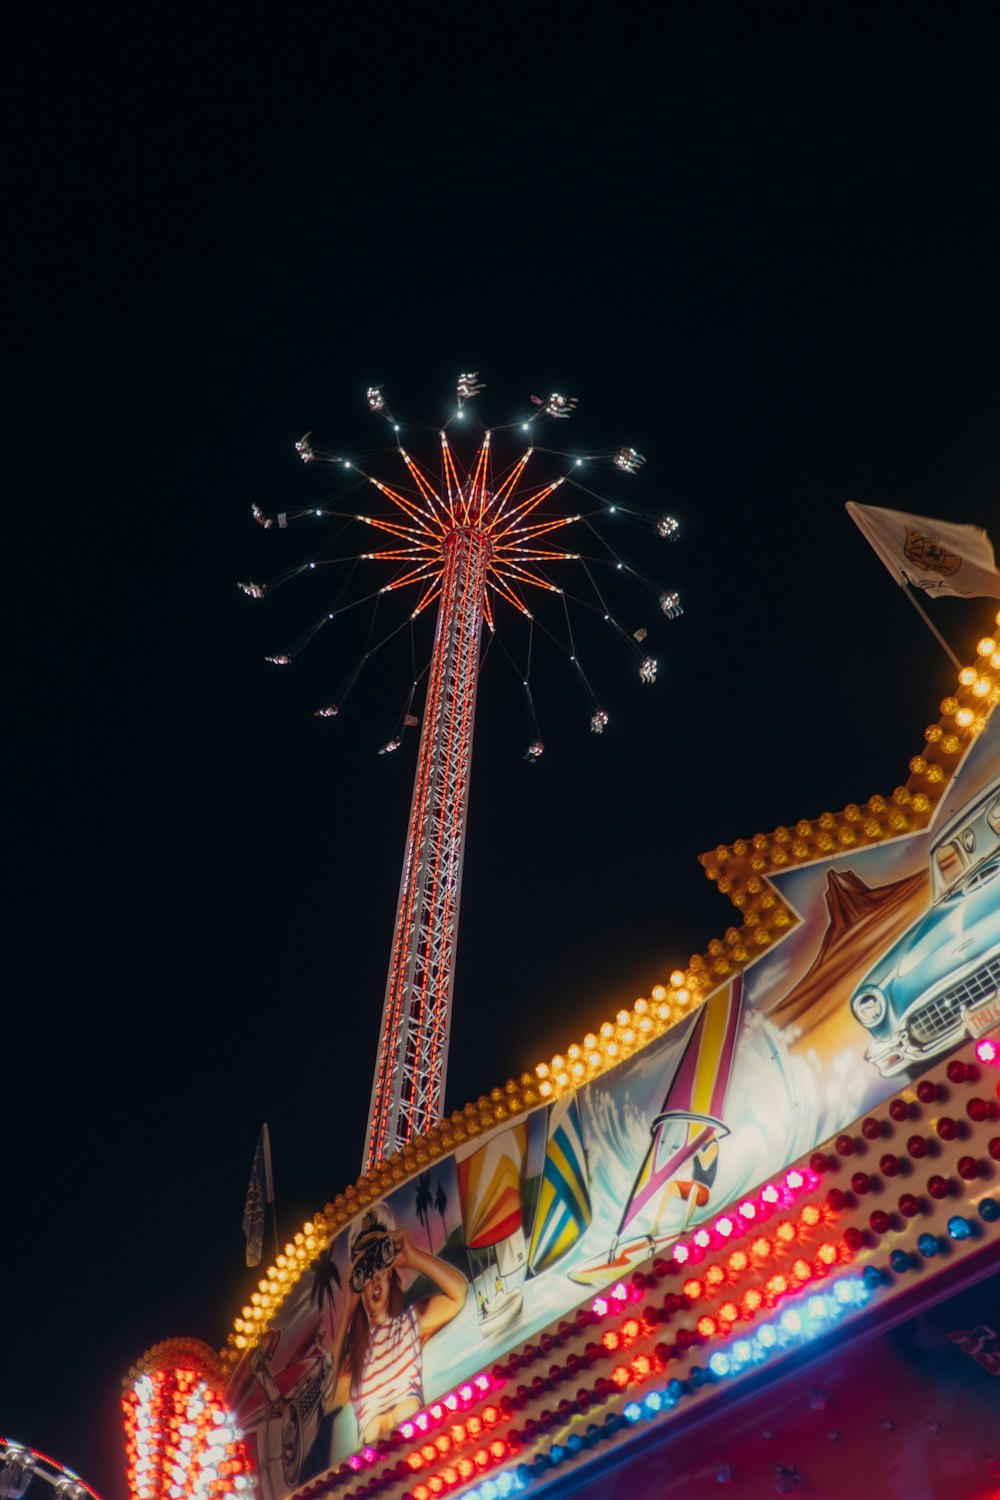 a carnival ride at night with a ferris wheel in the background